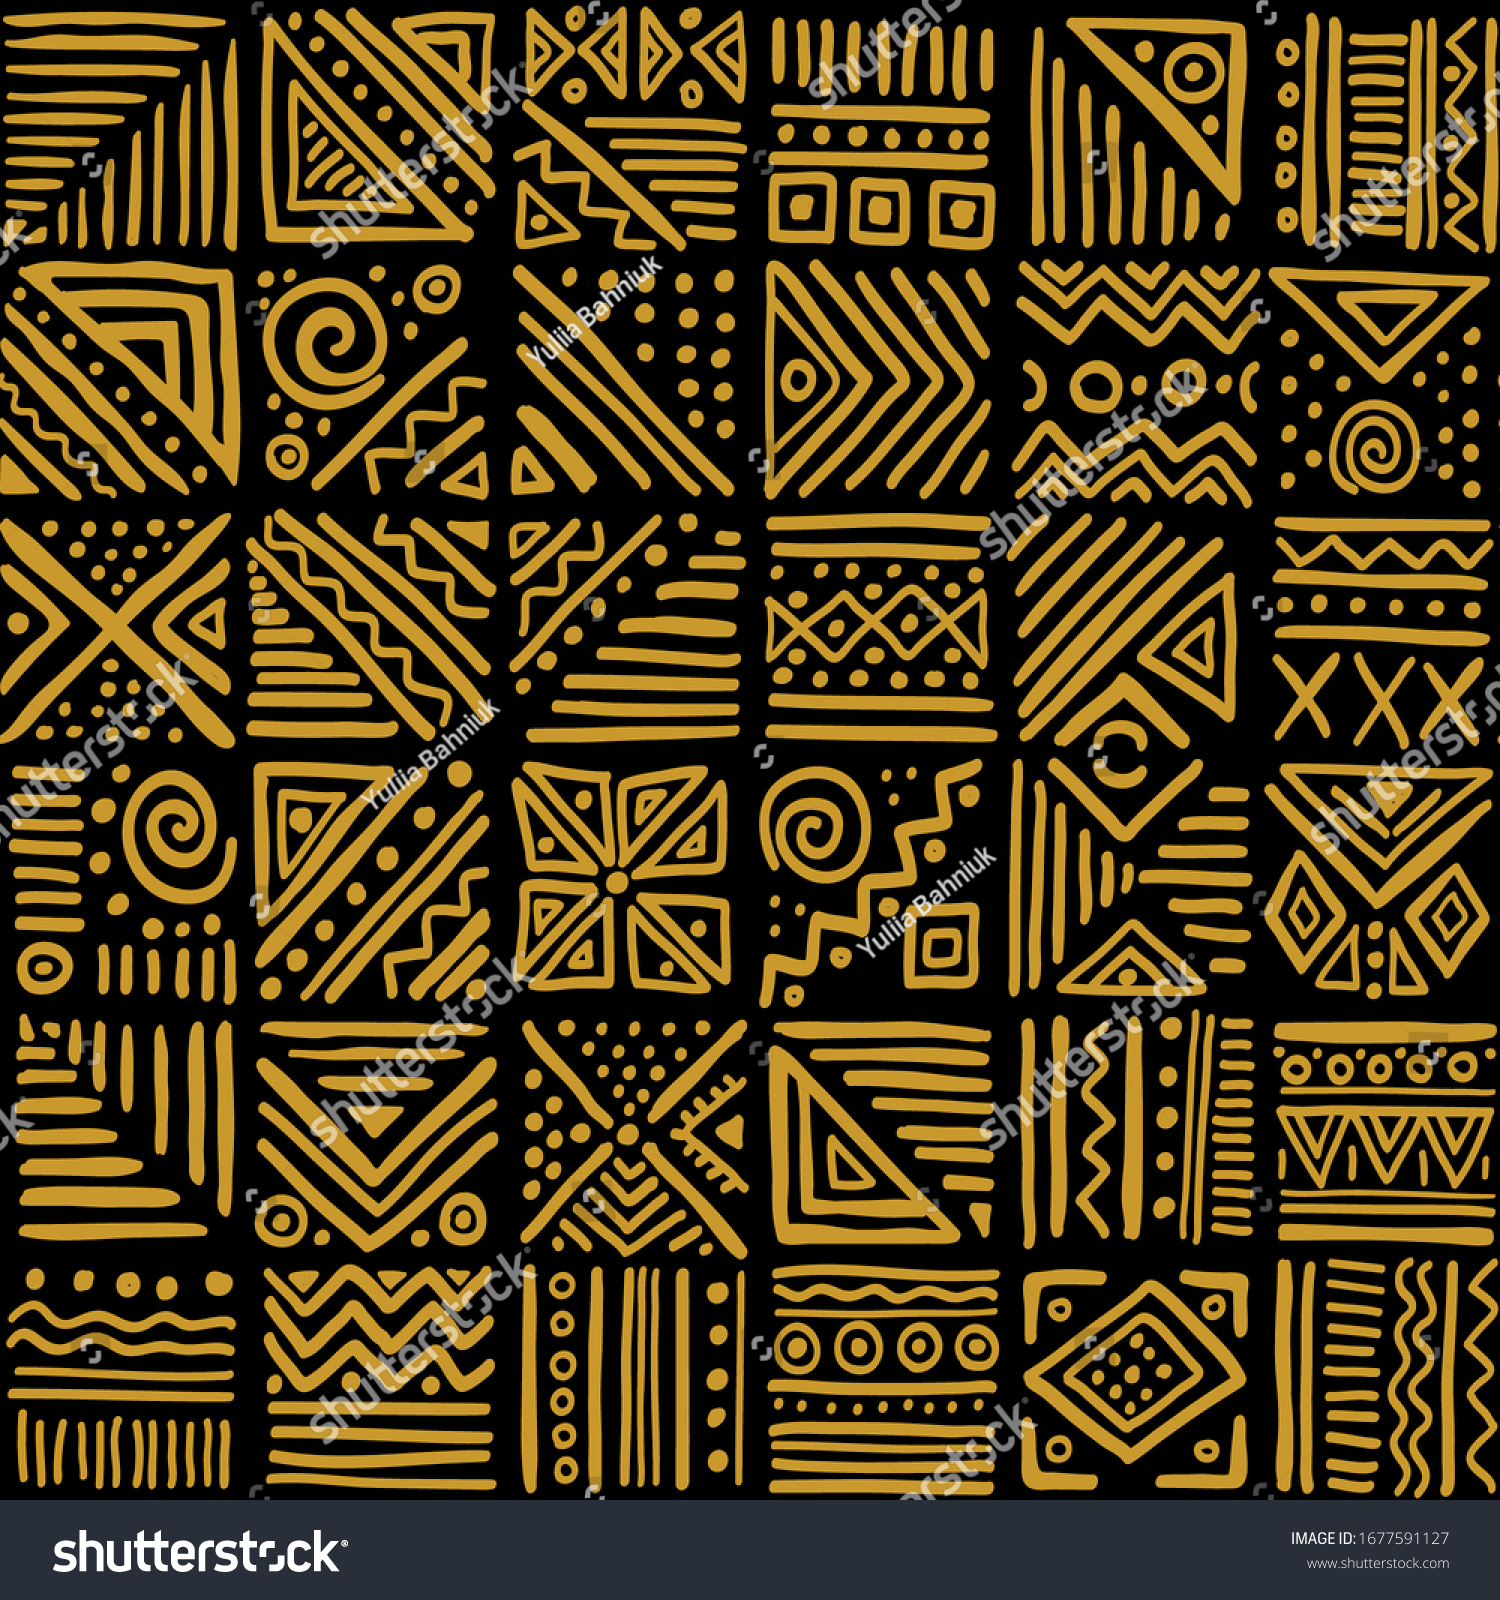 SVG of African clash vector seamless pattern in ethnic tribal style. Can be printed and used as wrapping paper, wallpaper, textile, fabric, apparel, etc. svg